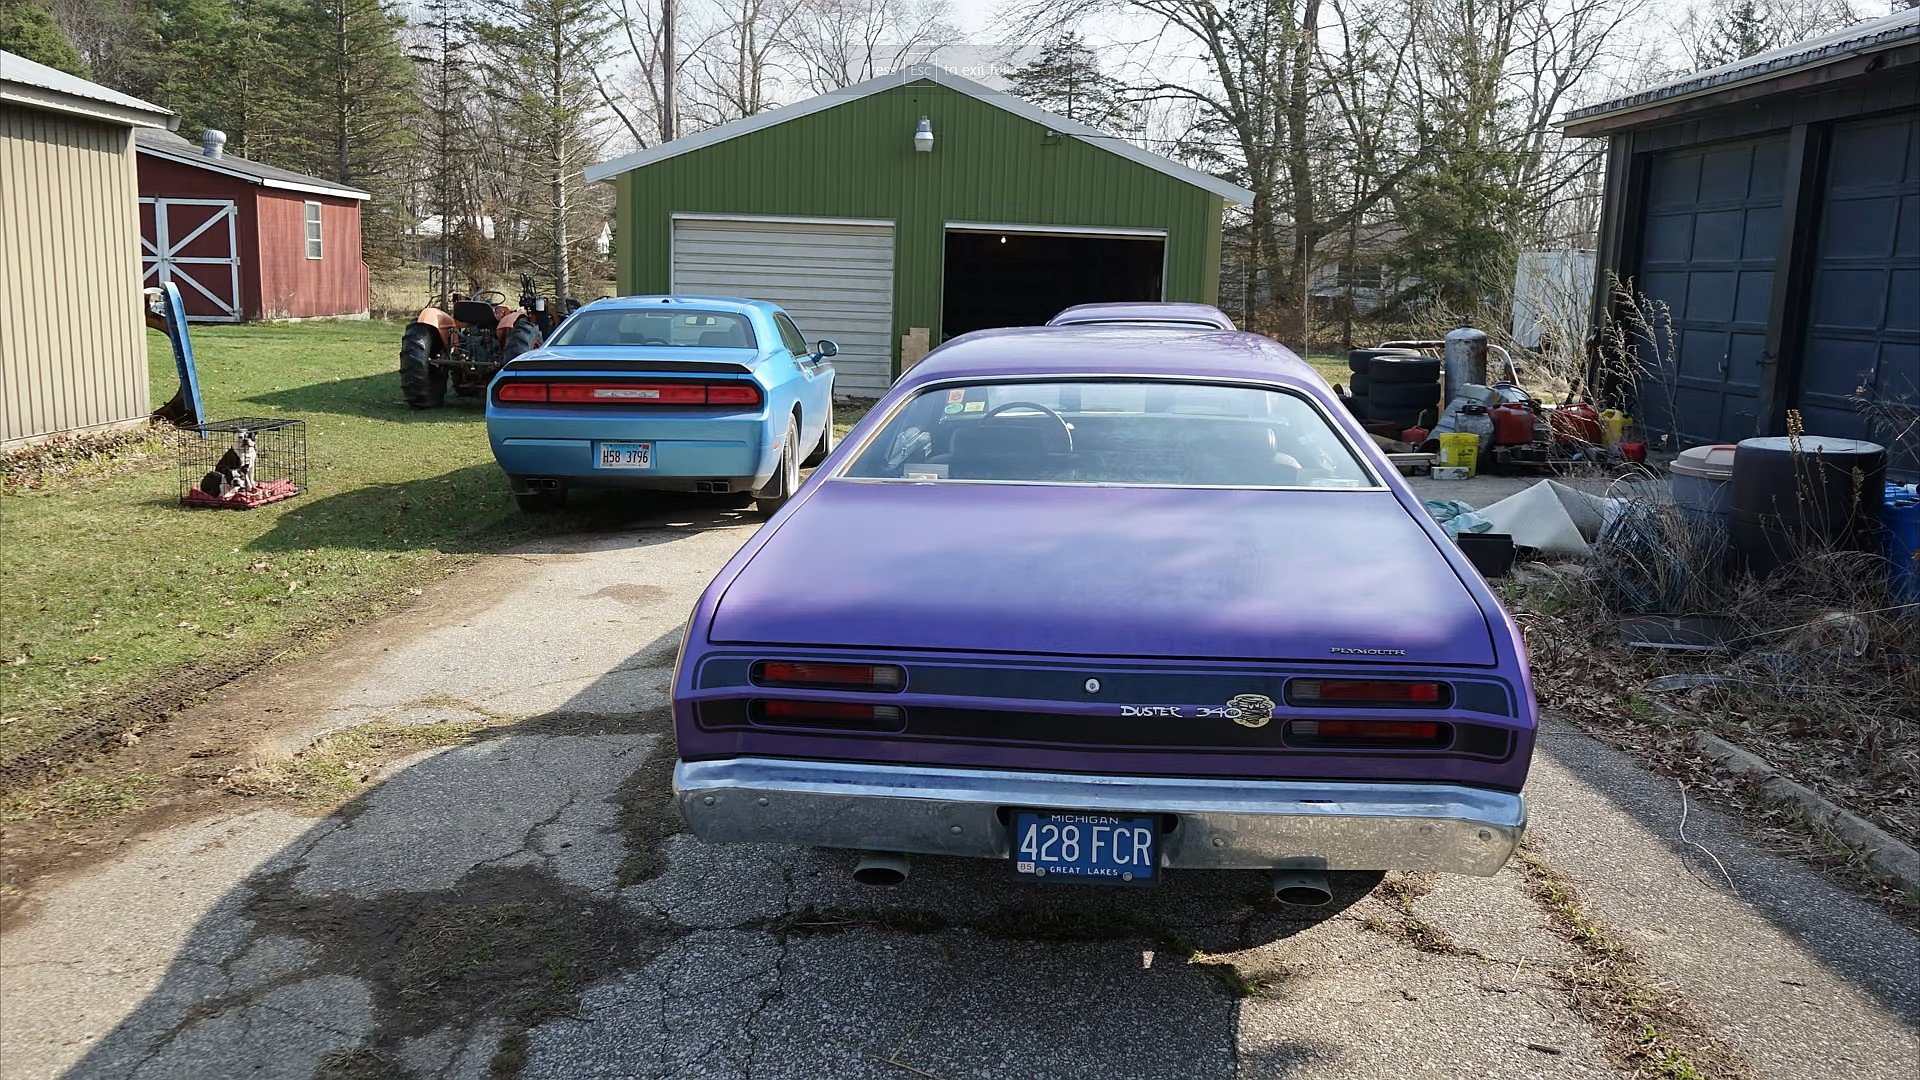 1971 Dodge Demon, Plymouth Duster Plum Crazy Twins See Daylight After 30+  Years - autoevolution